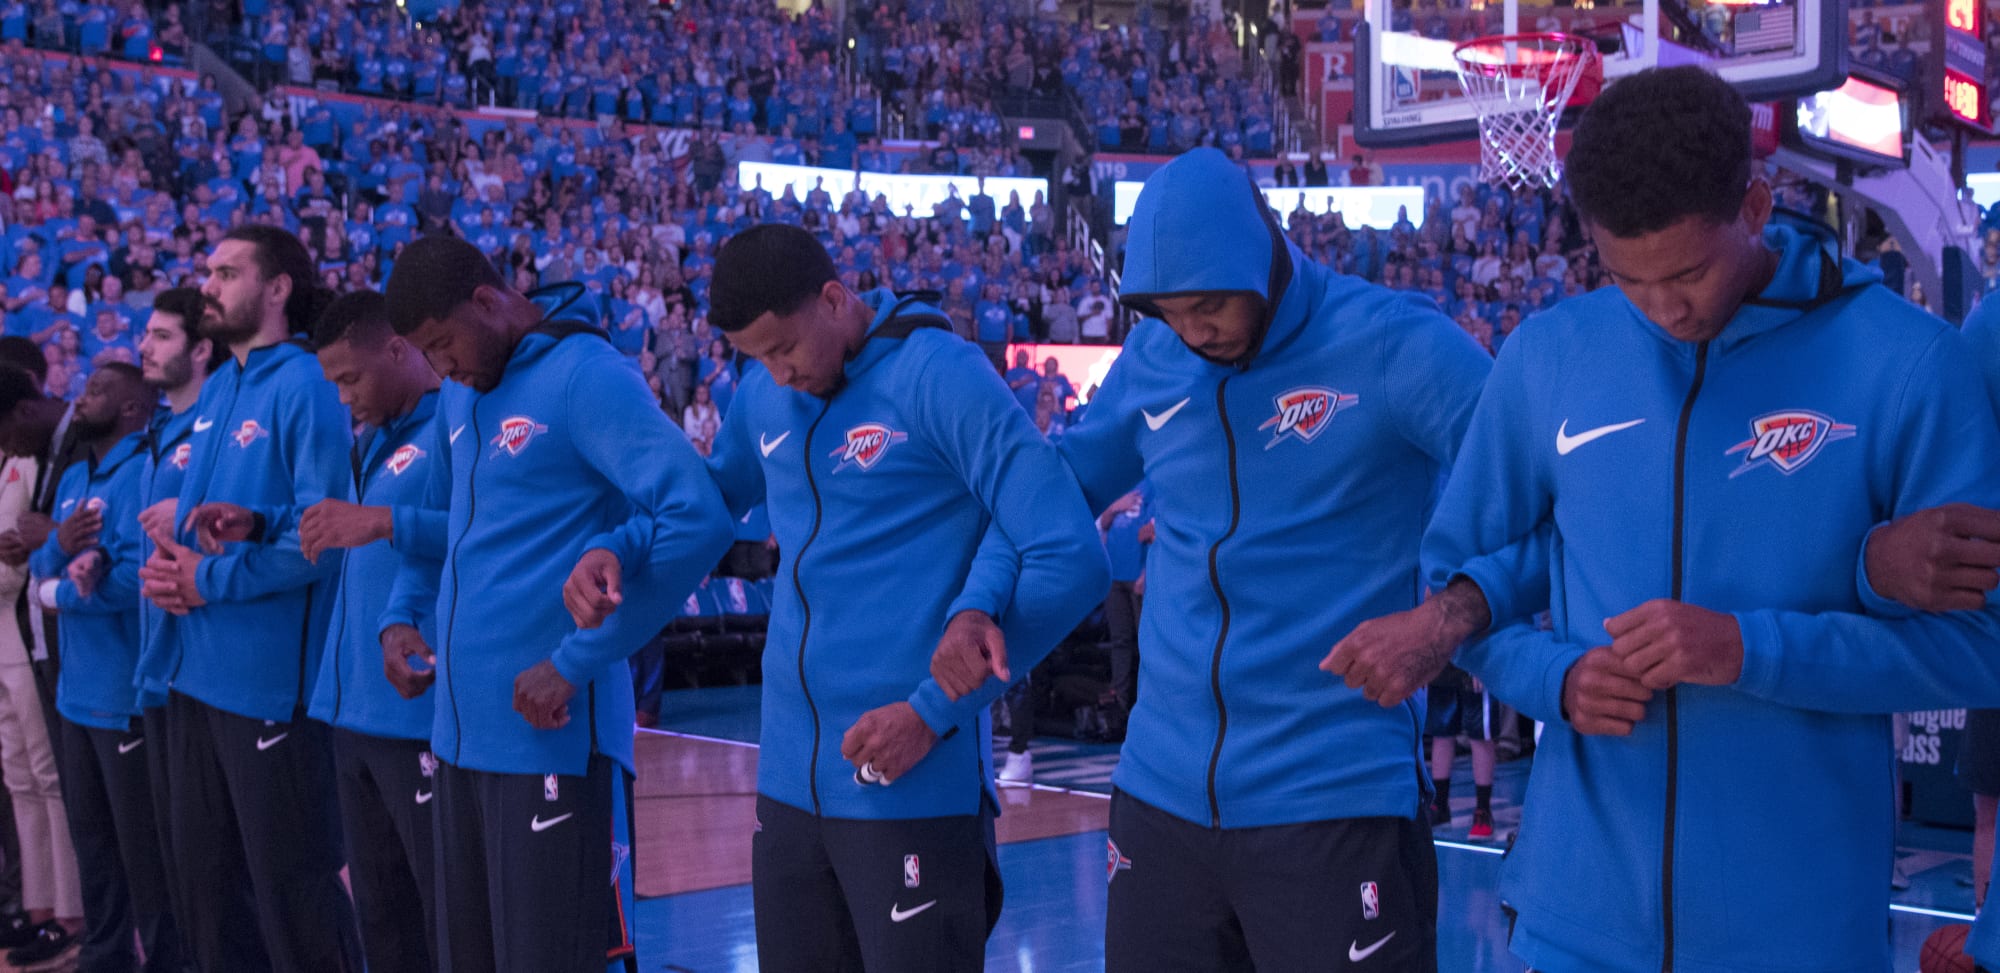 Oklahoma City Thunder Pulled Off One of the Coolest Crowd Stunts We've Seen  Last Night